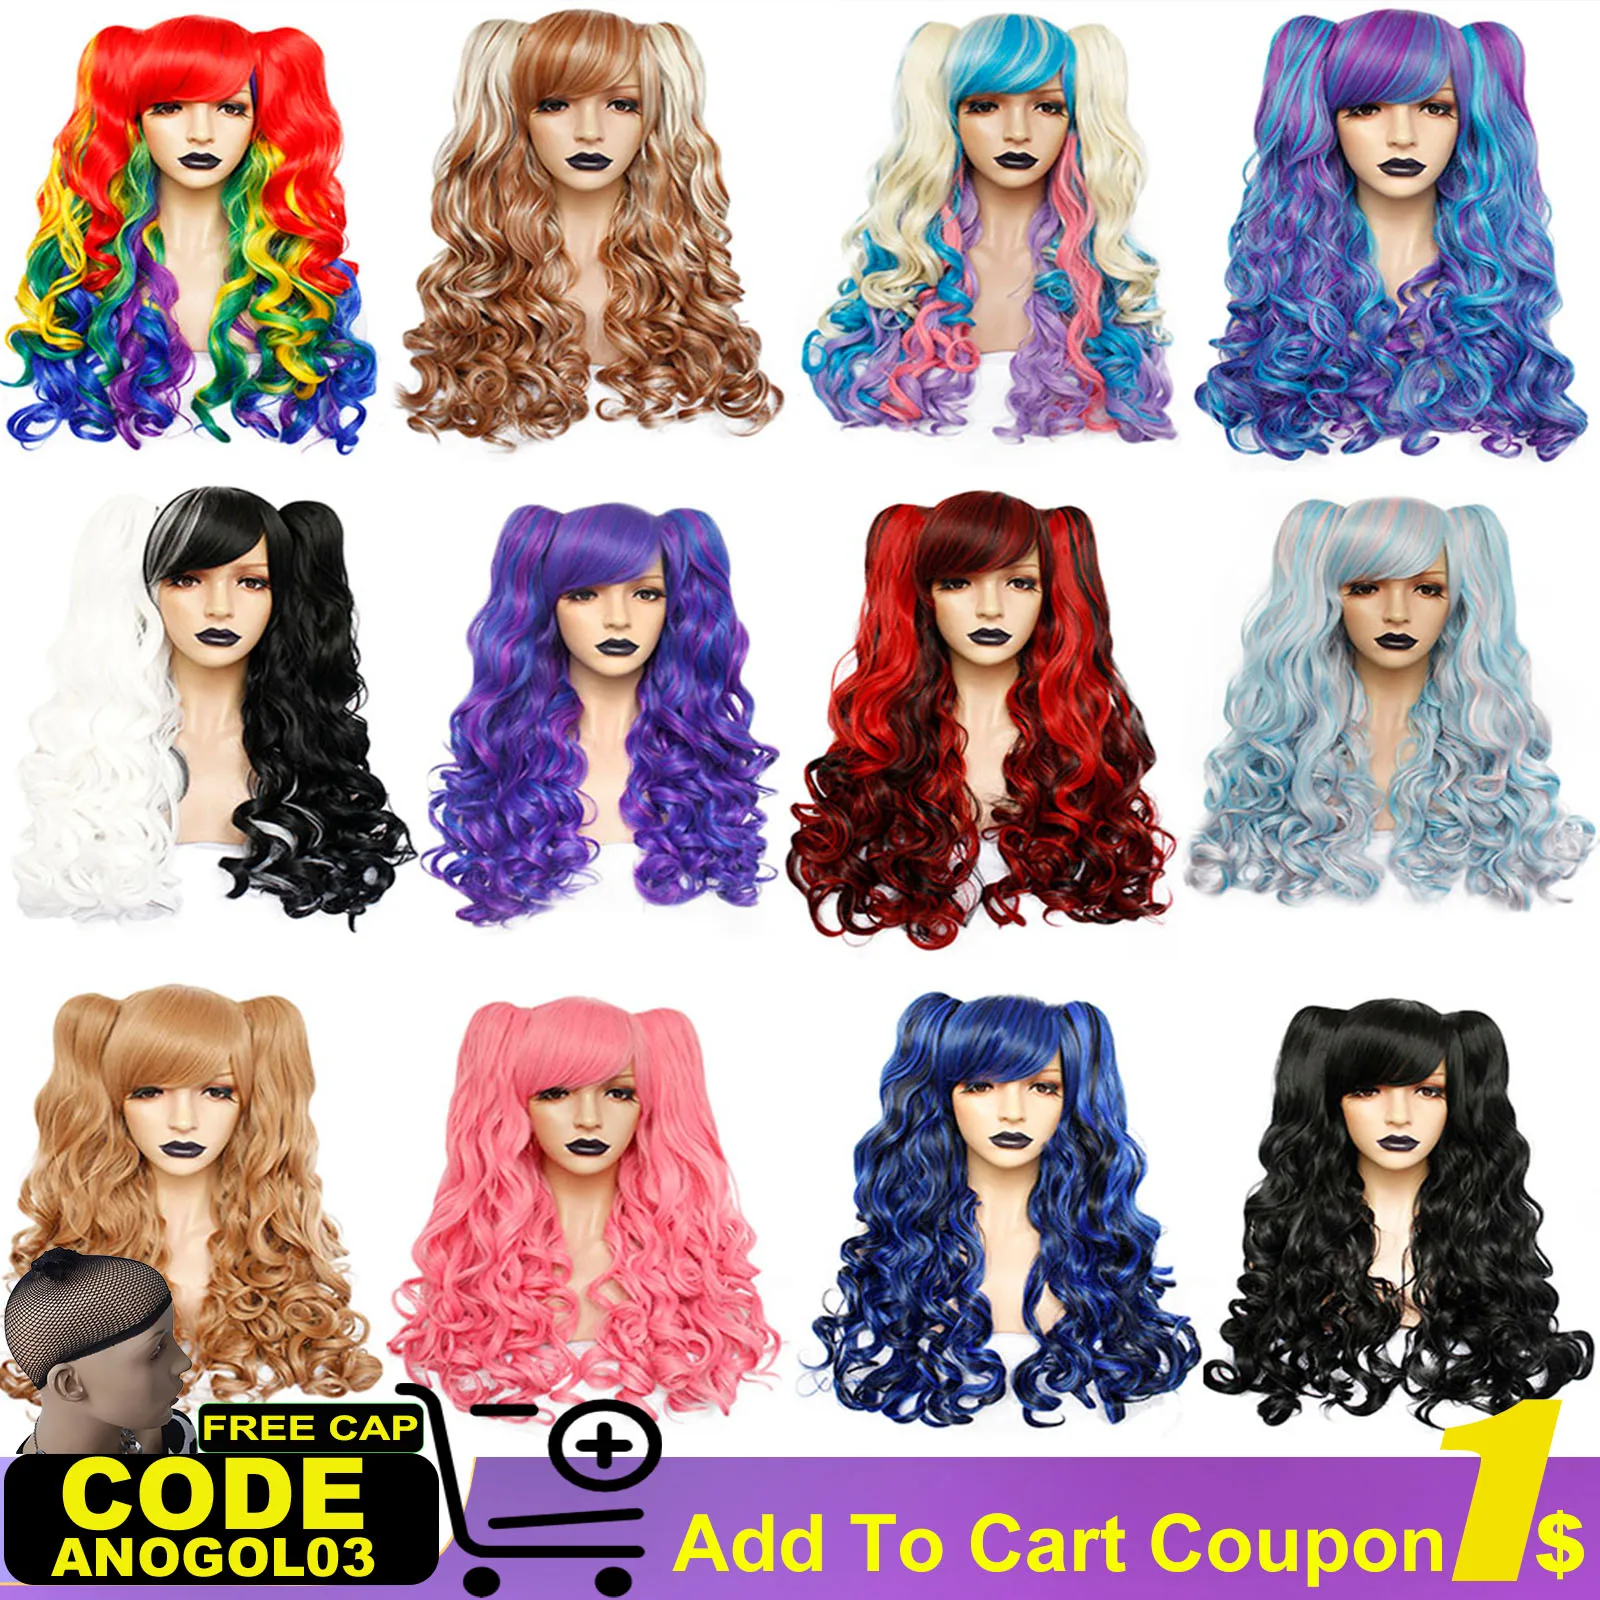 

ANOGOL Synthetic Lolita Colored Long Body Wave with Bangs Pink Blonde Mix Multicolor Hair Cosplay Wigs Ponytails for Women Party